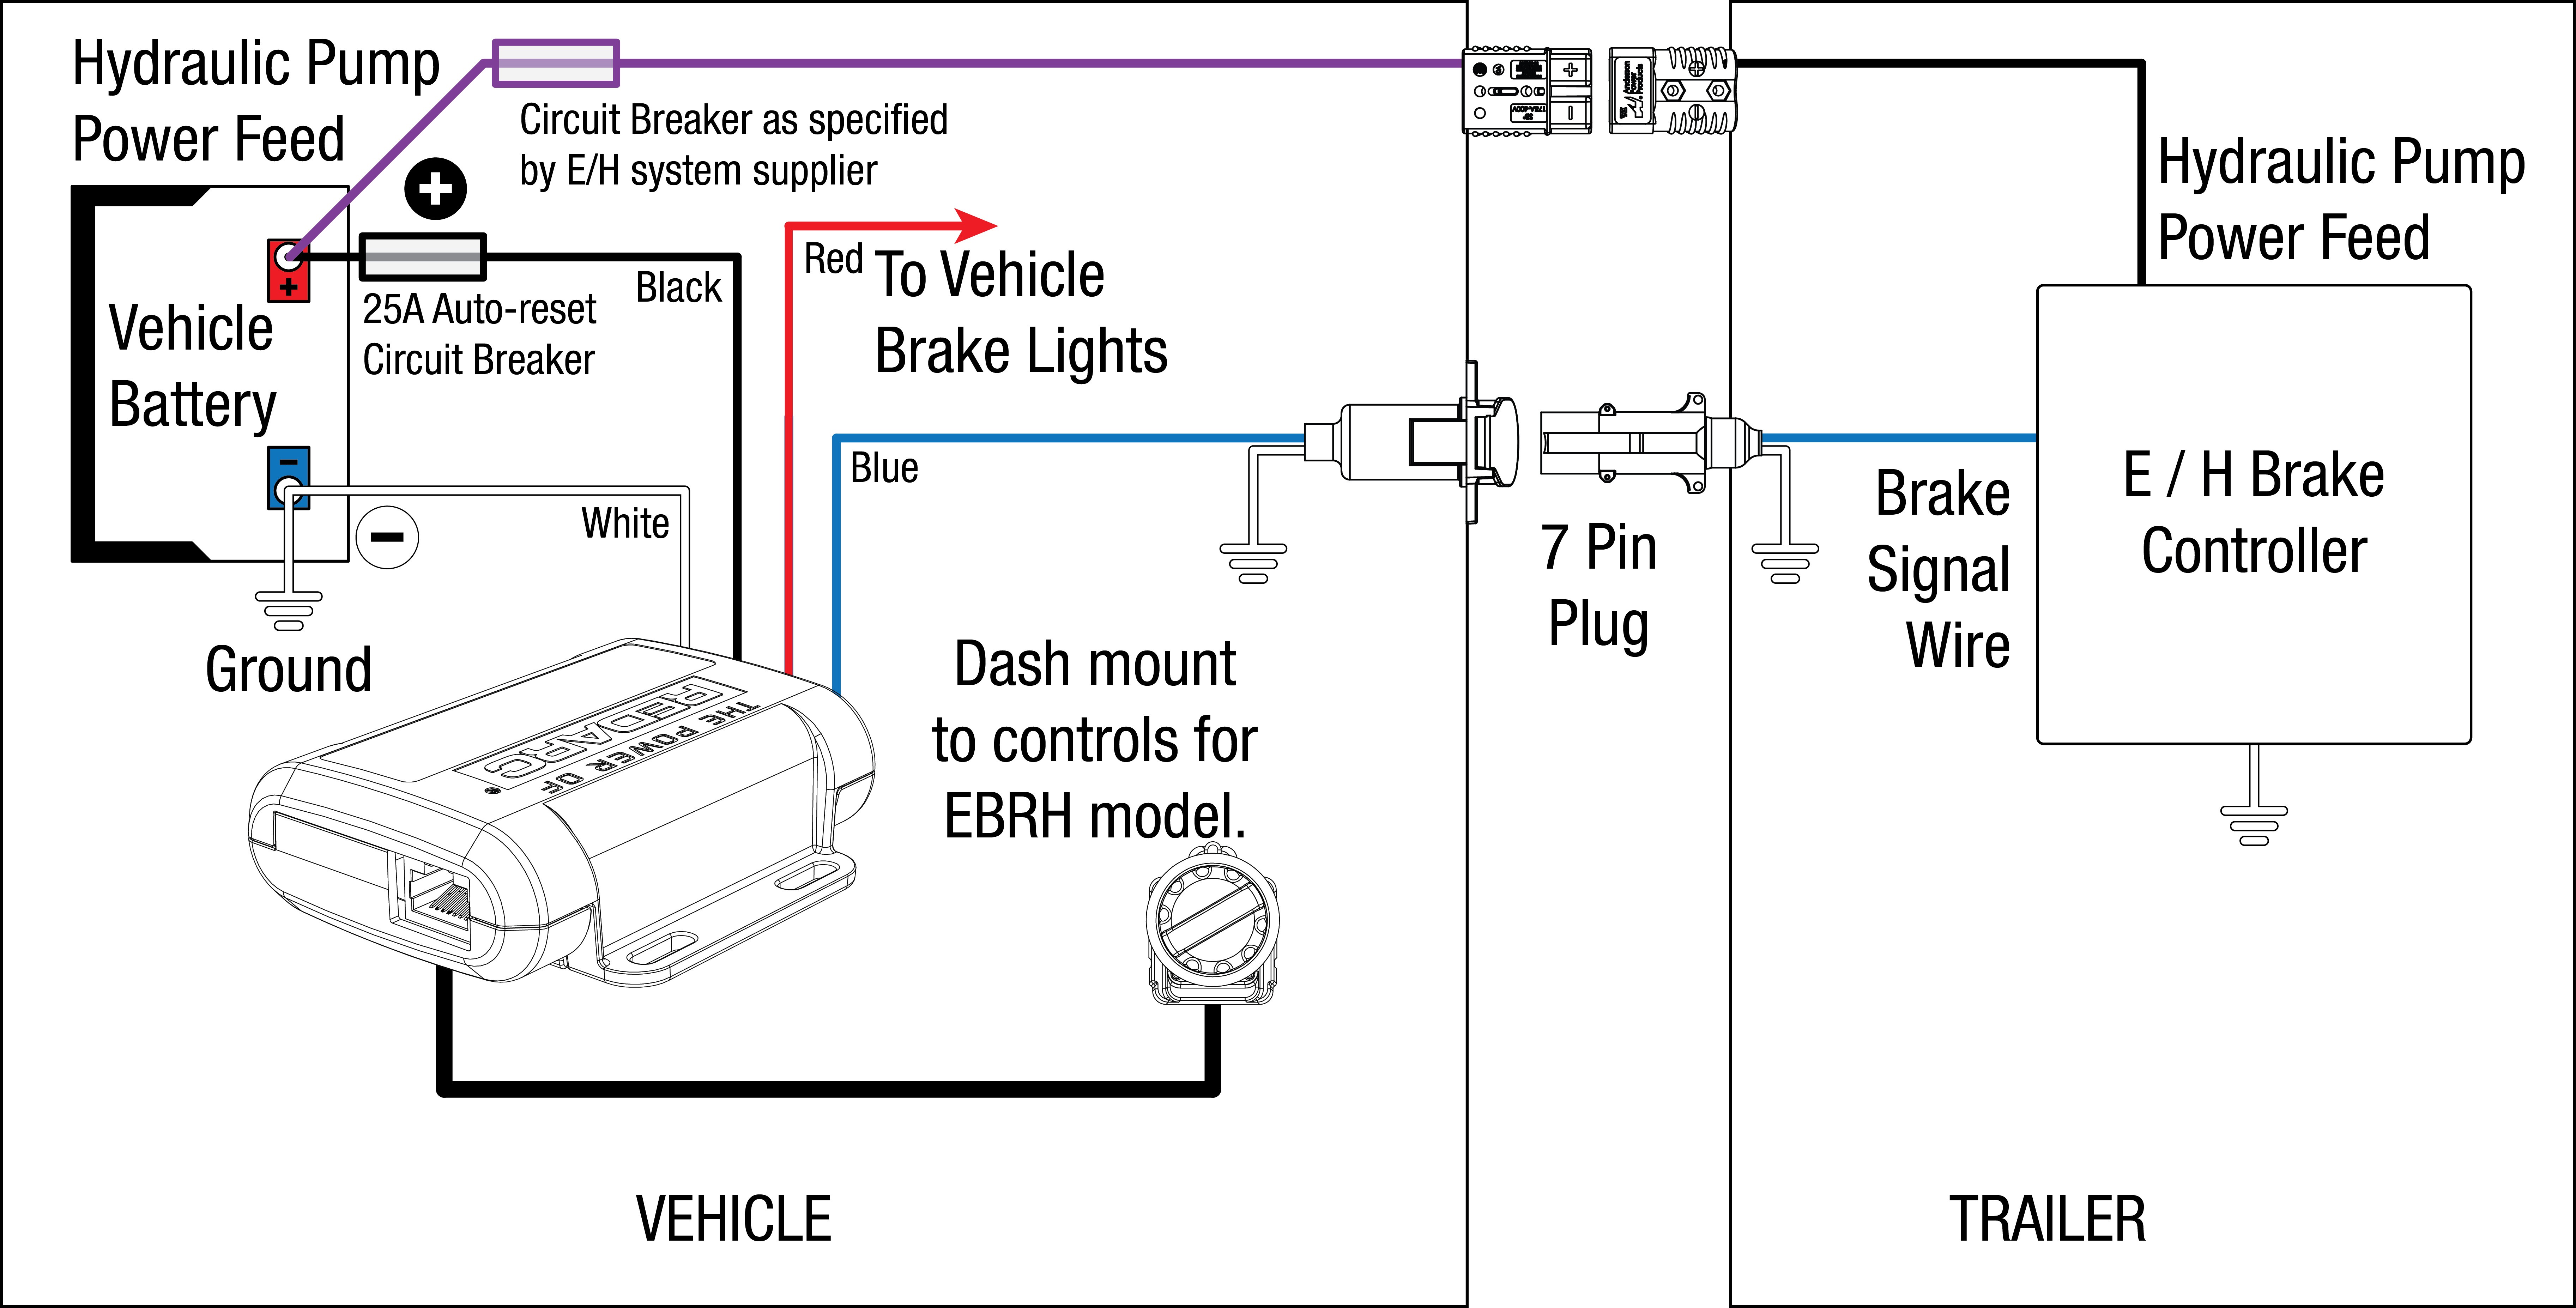 Electric Trailer Brake Controller Wiring Diagram And inst 03 At Primus Iq In